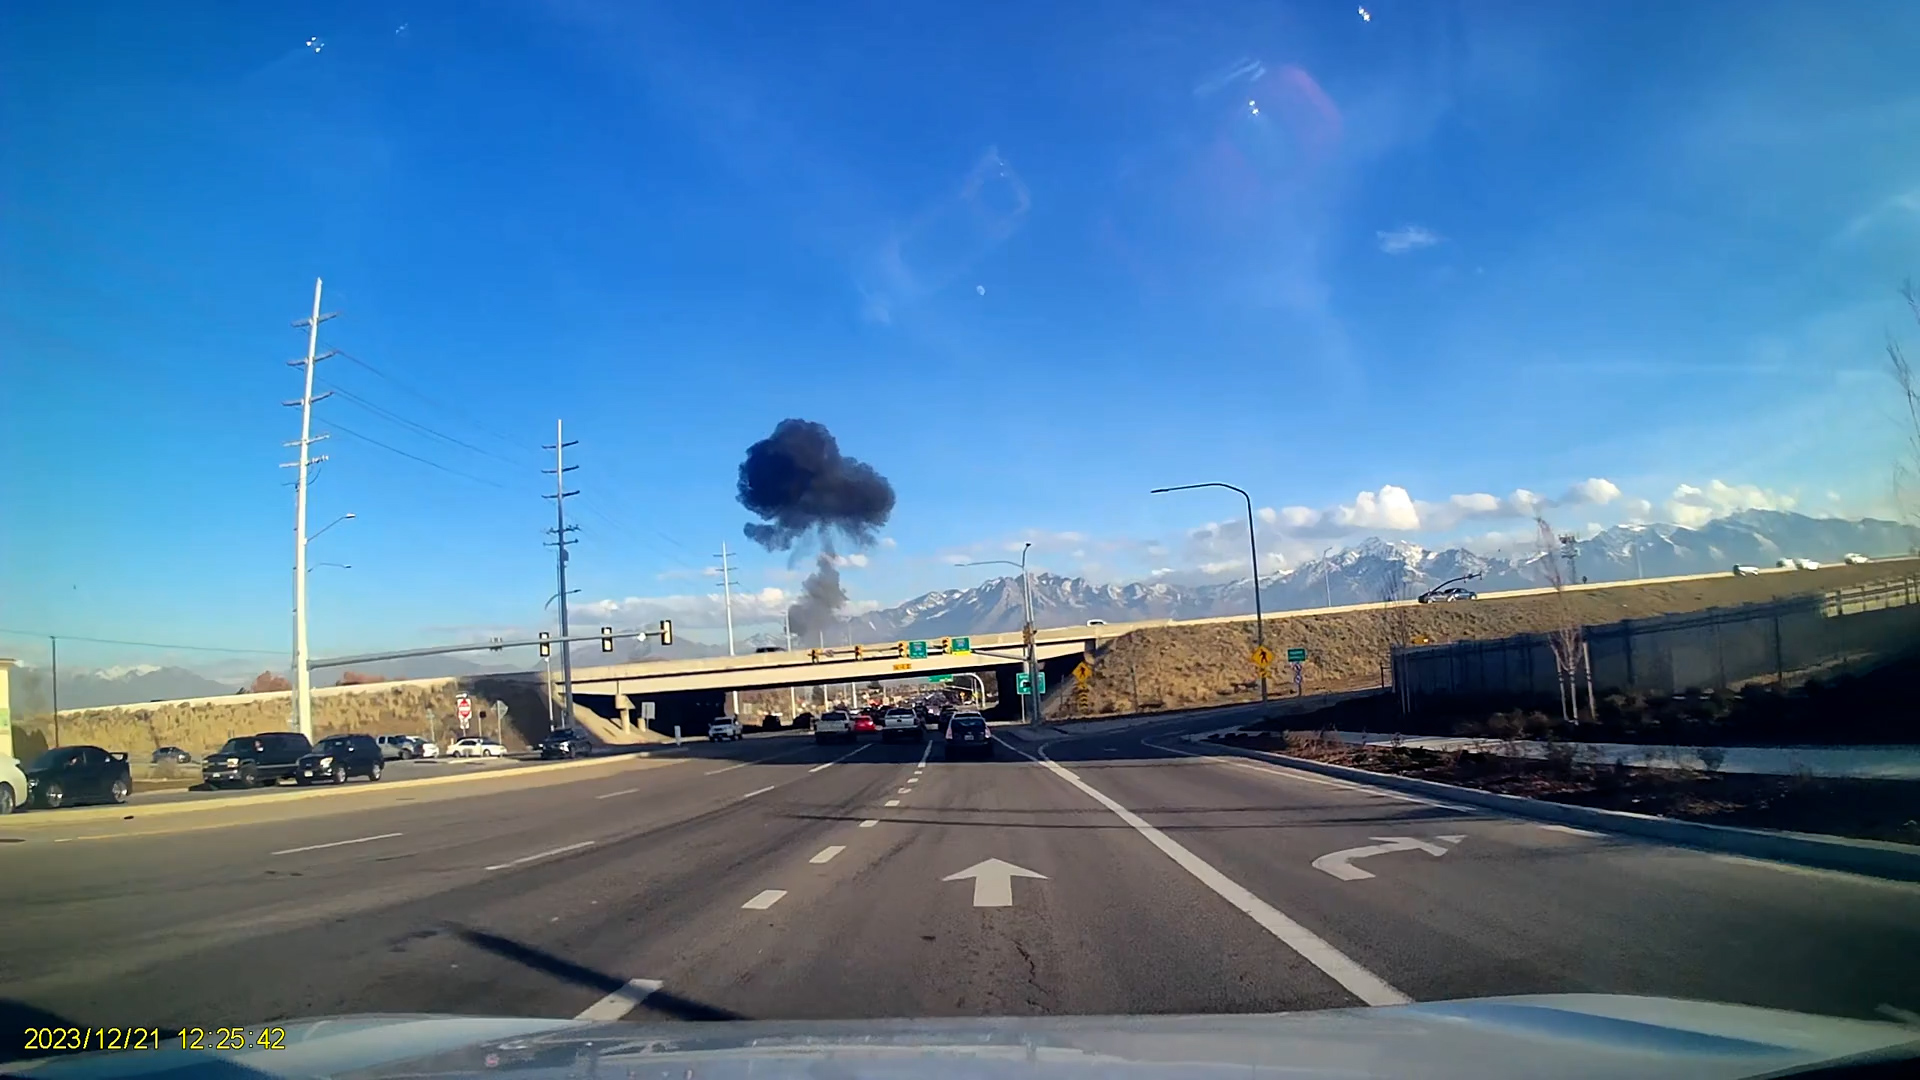 A plume of smoke formed by the transformer explosion on 2200 West and 4700 South....